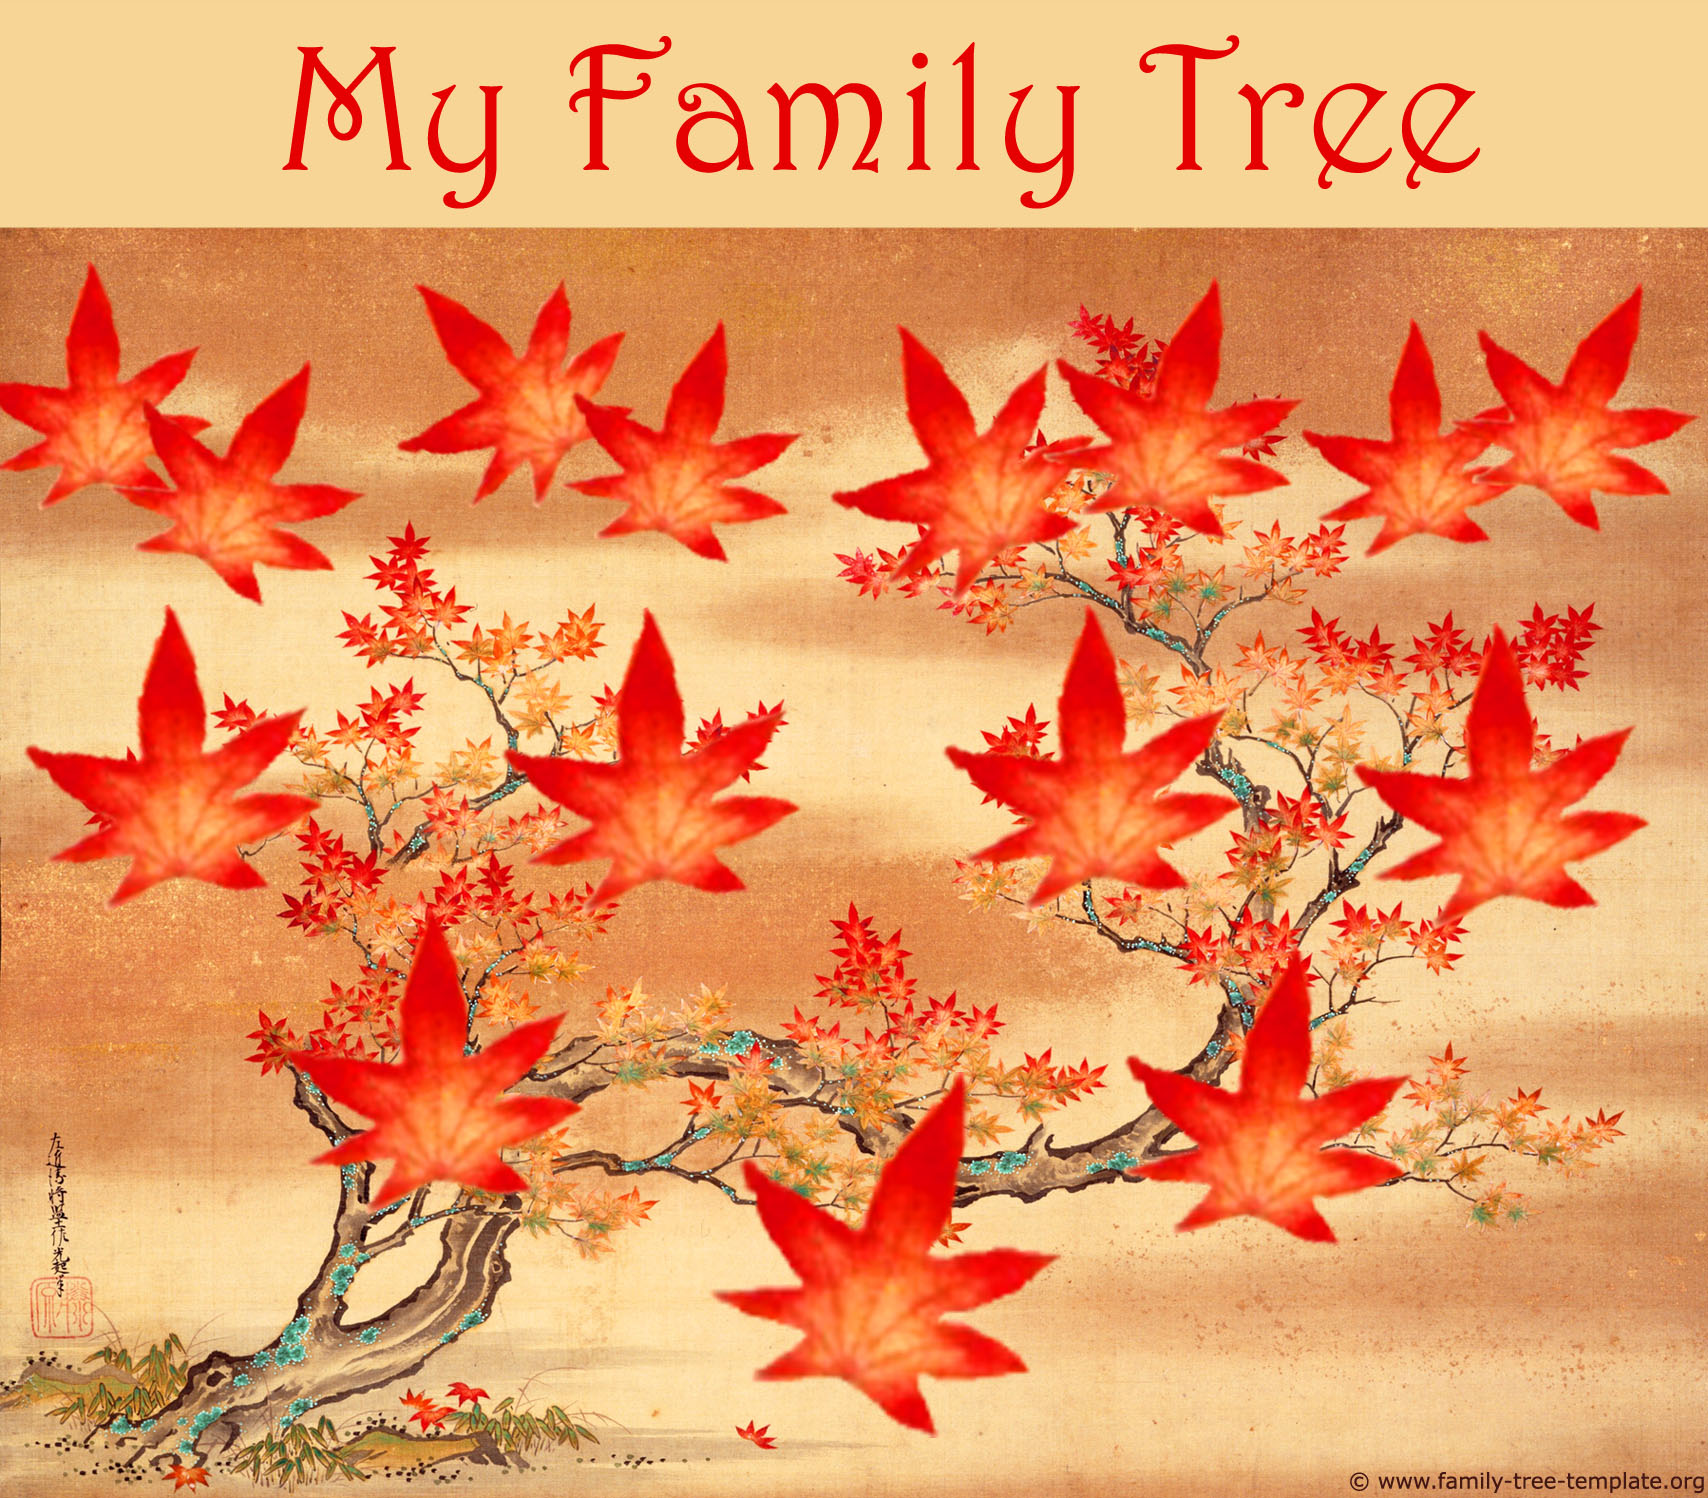 Family tree template in old Japanese style.